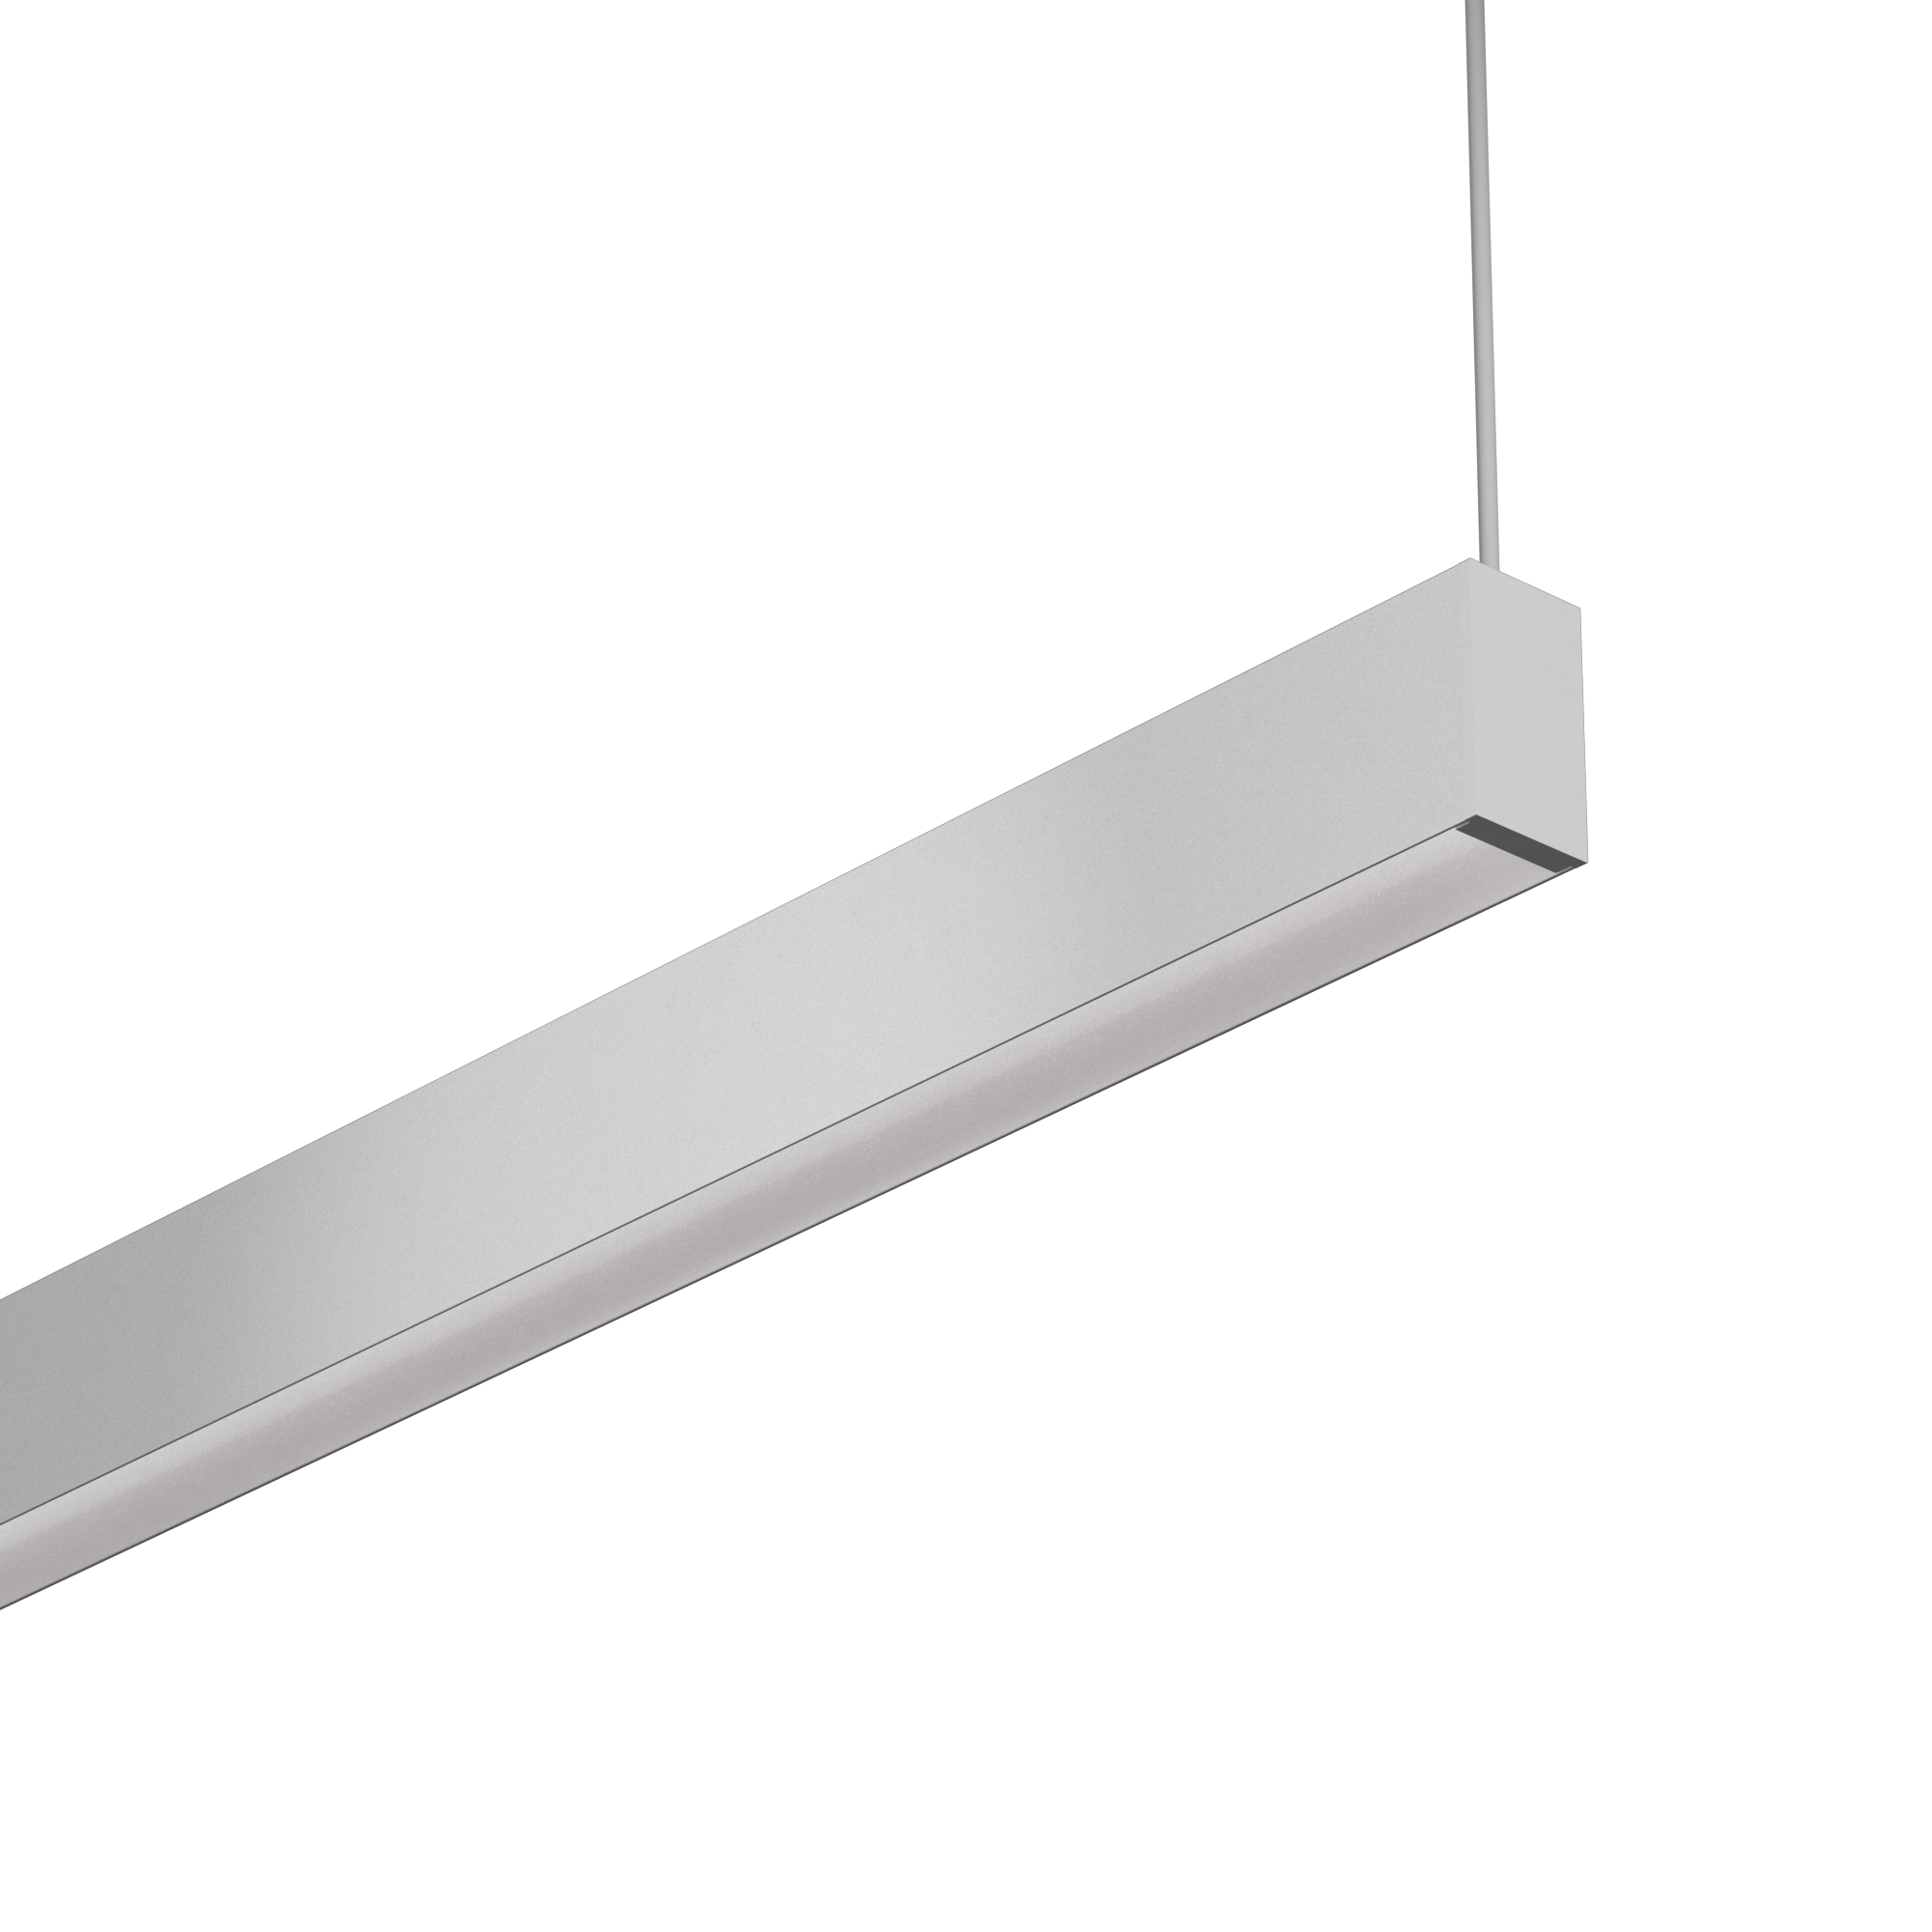 0.95” Ultra-Compact LED Linear
NANOBeam is 0.95” wide, bringing regressed SmartBeam® capabilities to a low-glare form factor that complements architectural space. NANOBeam features a remote driver to remove visual bulk.

 

Beam profile: 0.95” (24mm) x 1.73” (44mm)